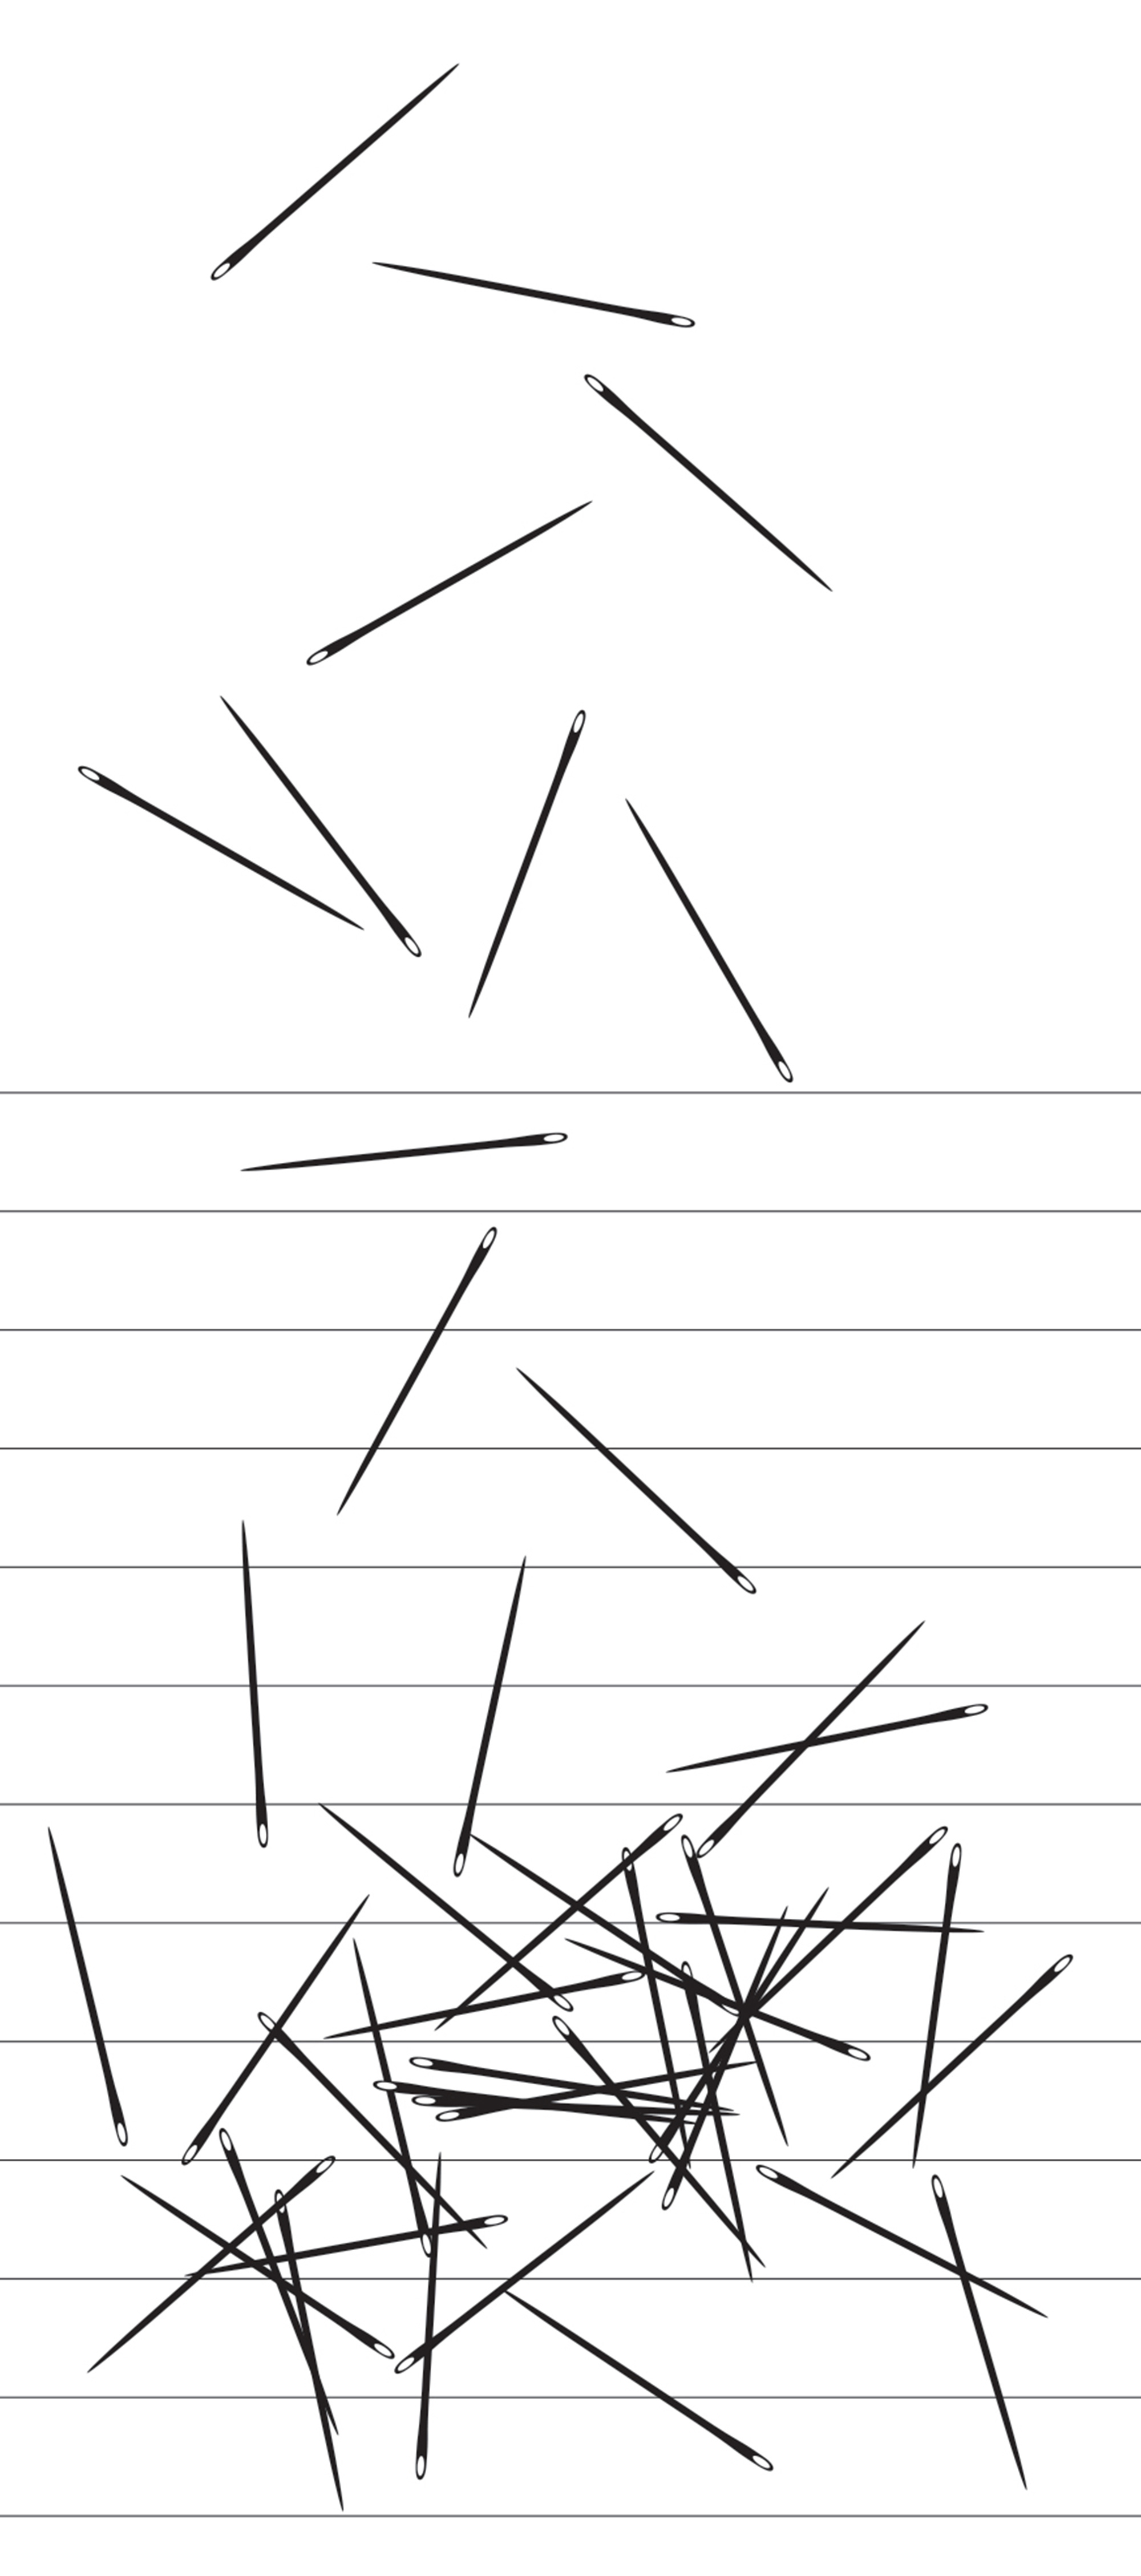 A digital illustration of needles strewn randomly on a ruled piece of paper. Some needles lie entirely between lines, some intersect one line, and some intersect two lines.